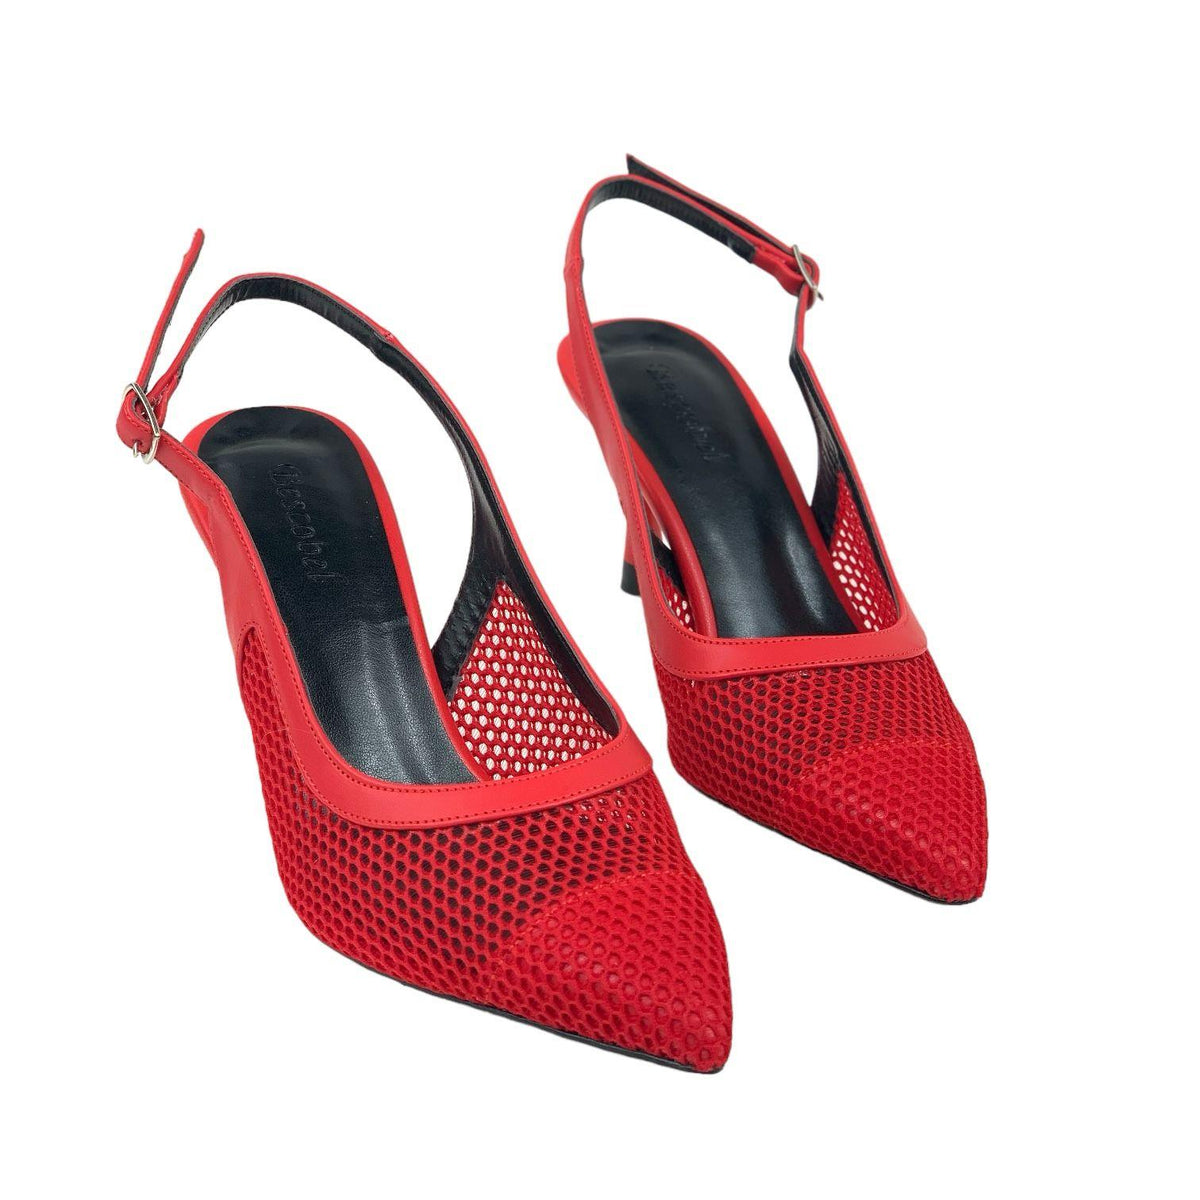 Women's Yabv Red Mesh Detailed Summer Shoes Sandals 7 cm - STREETMODE ™